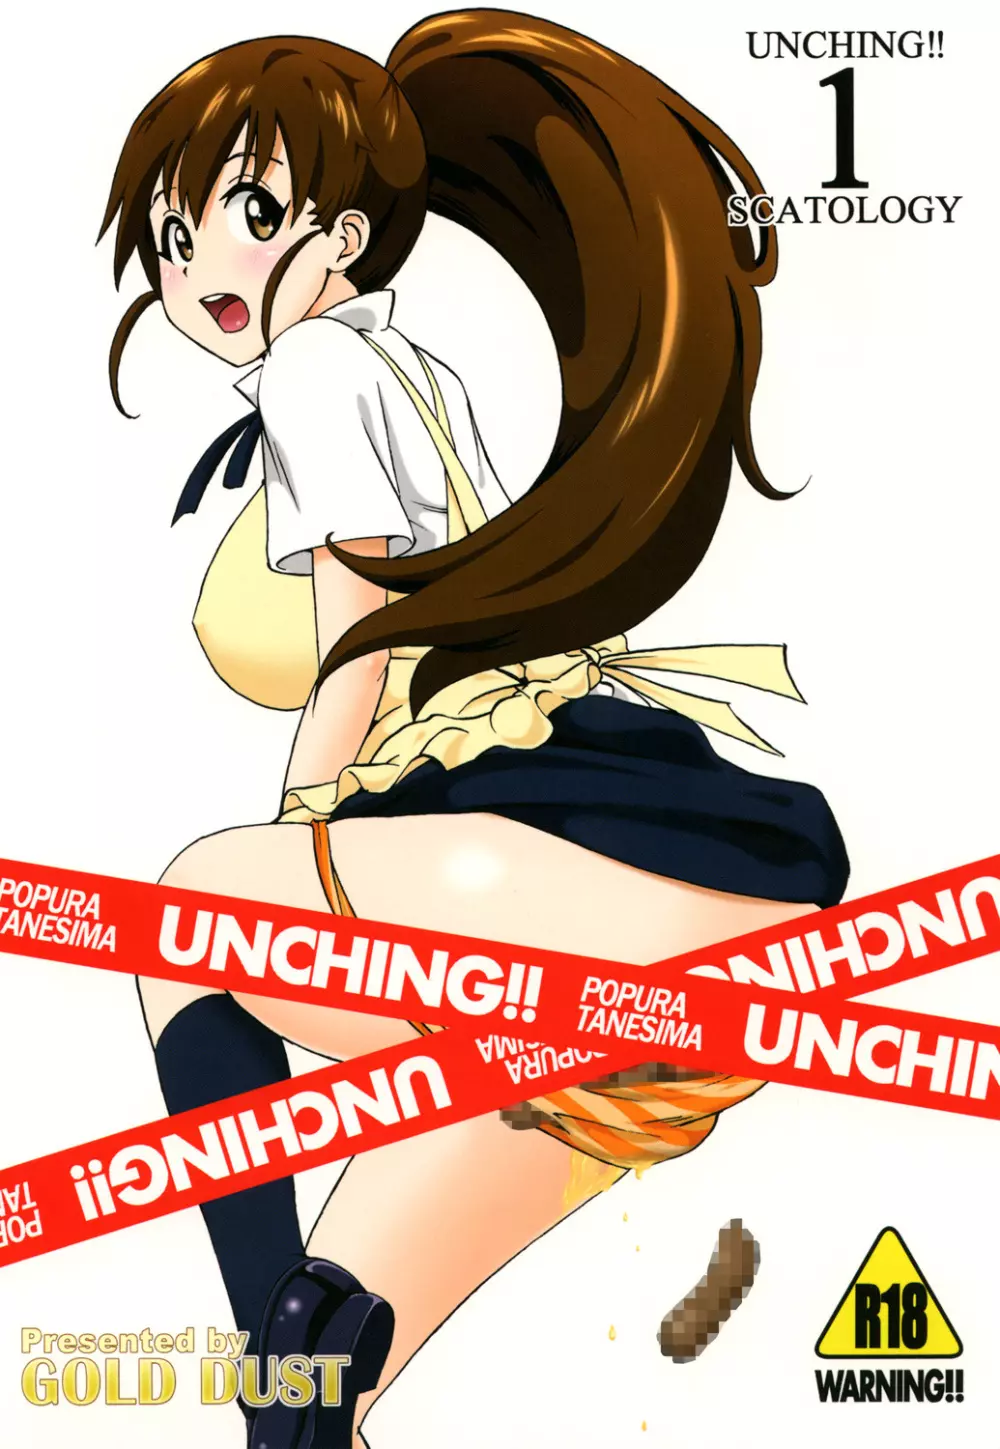 UNCHING!! - page1